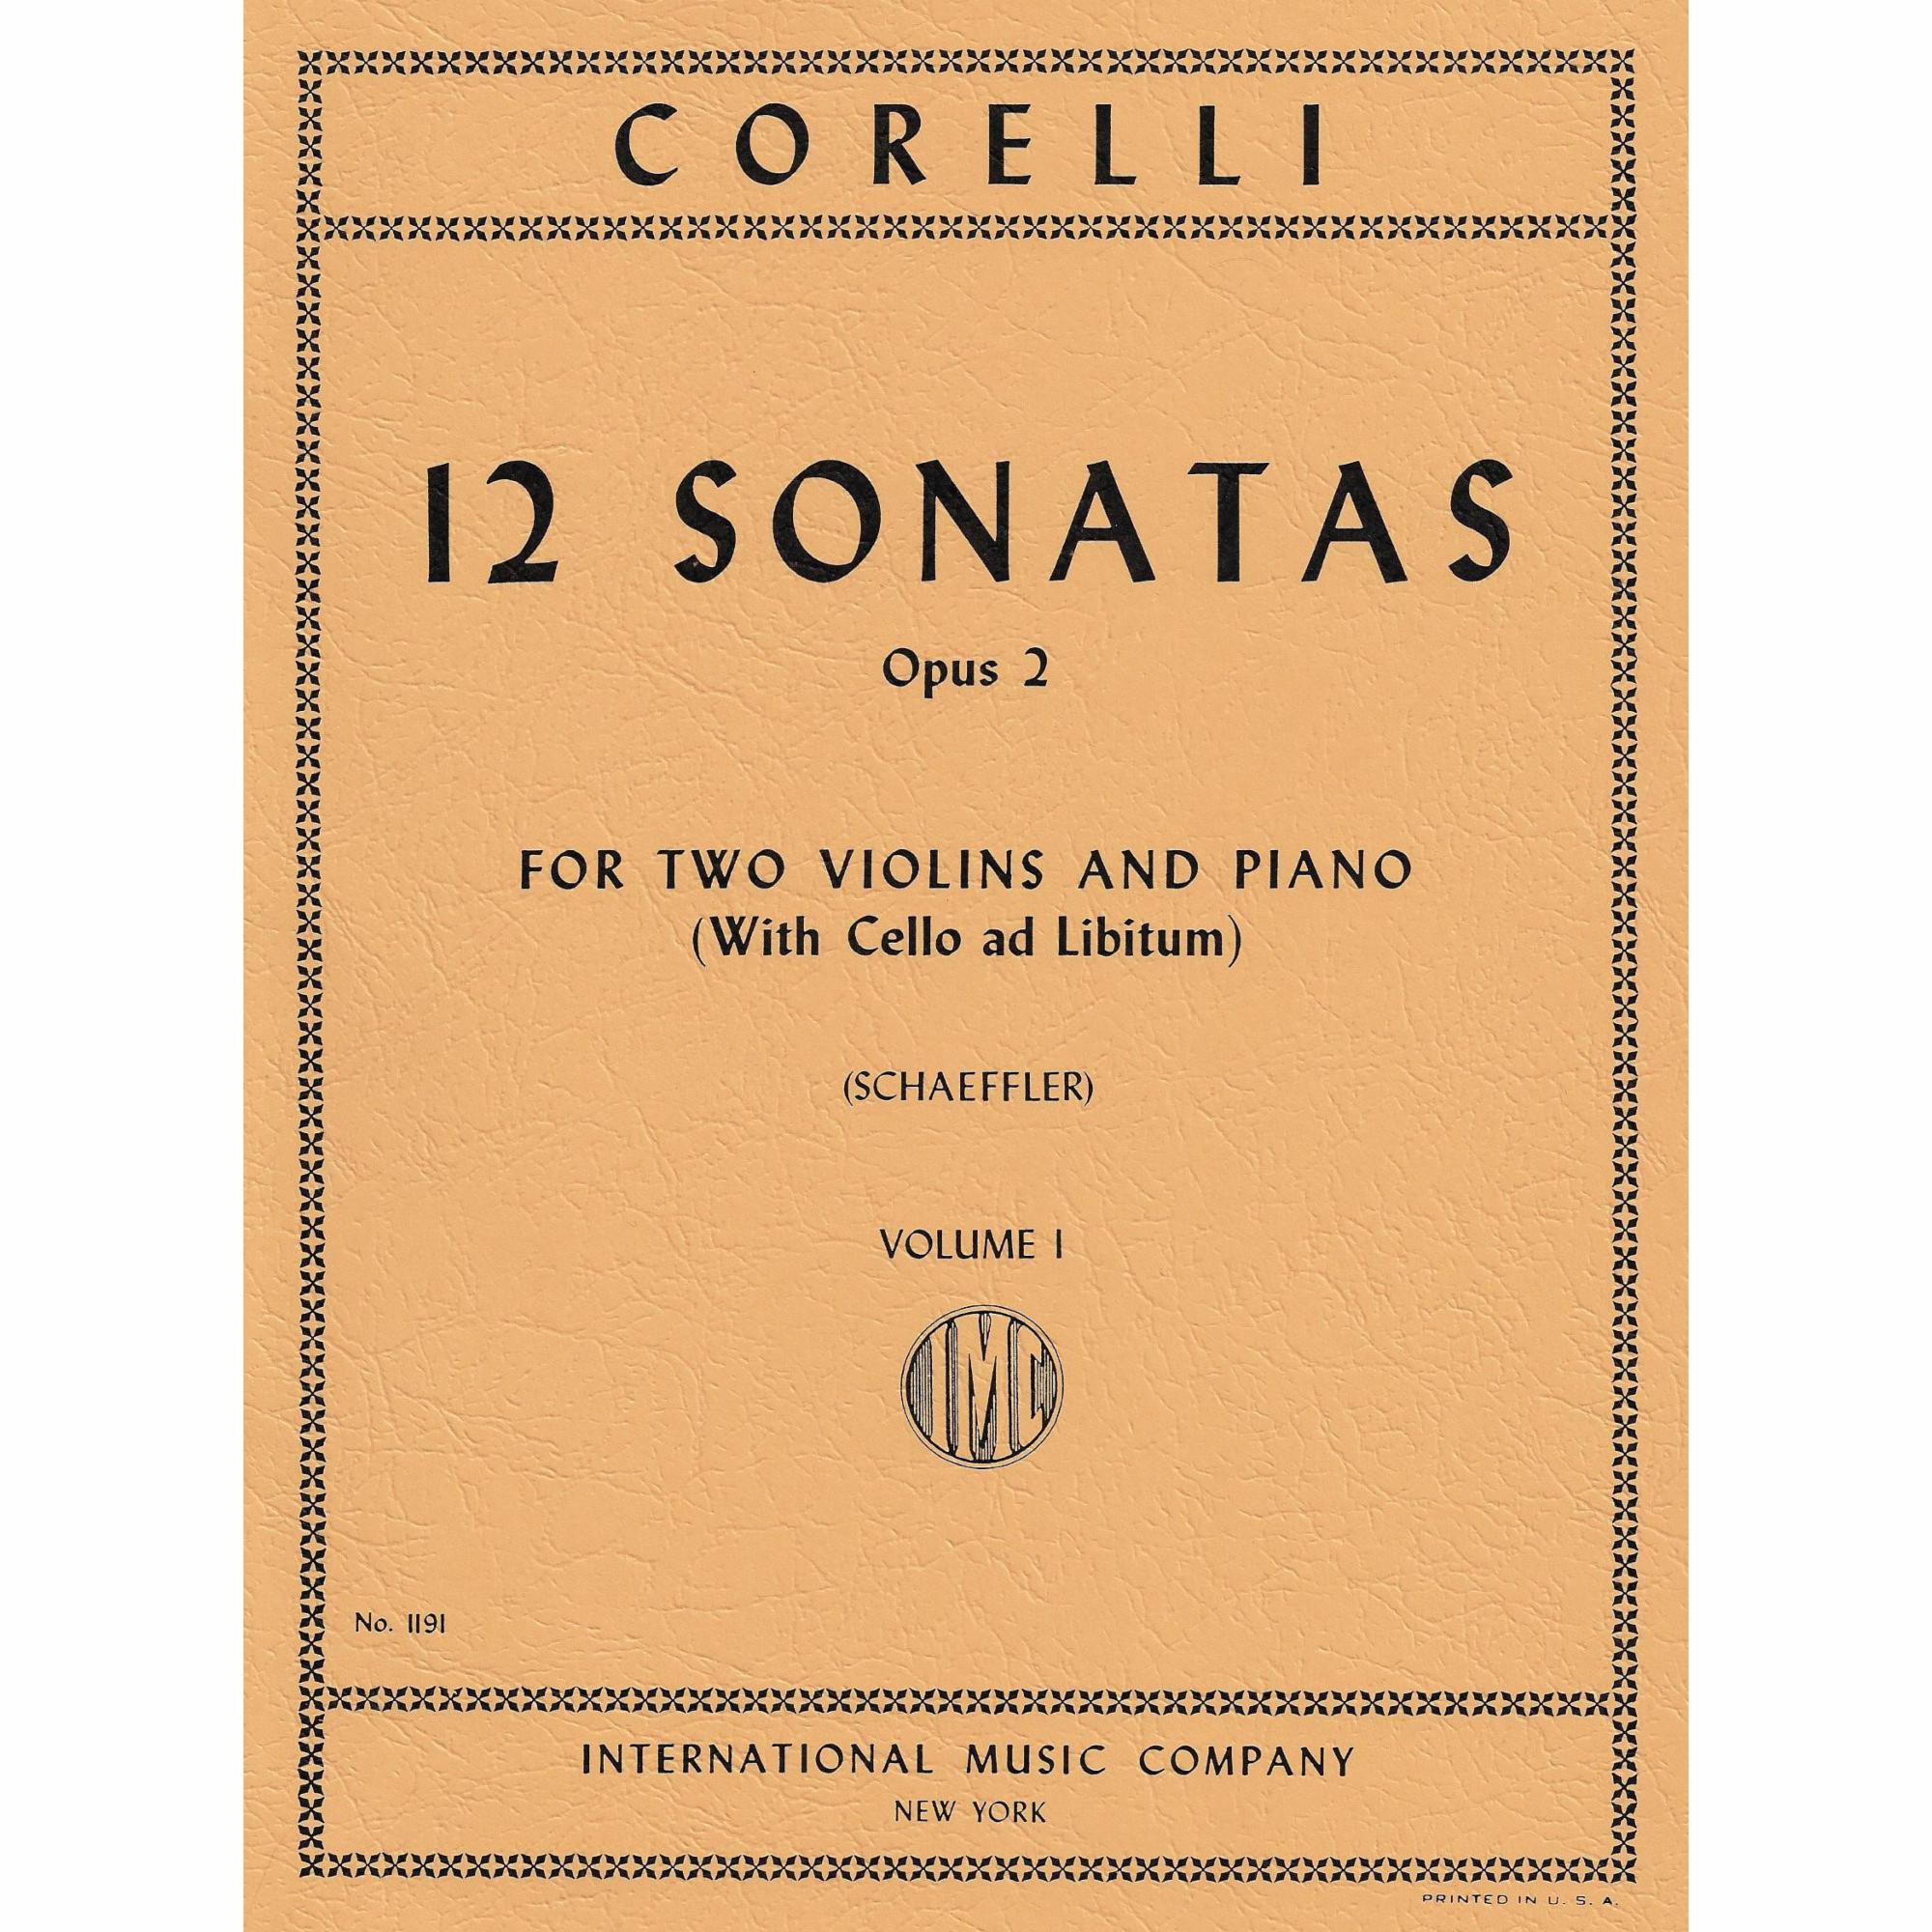 Corelli -- 12 Sonatas, Op. 2, Bks. I-III for Two Violins and Piano